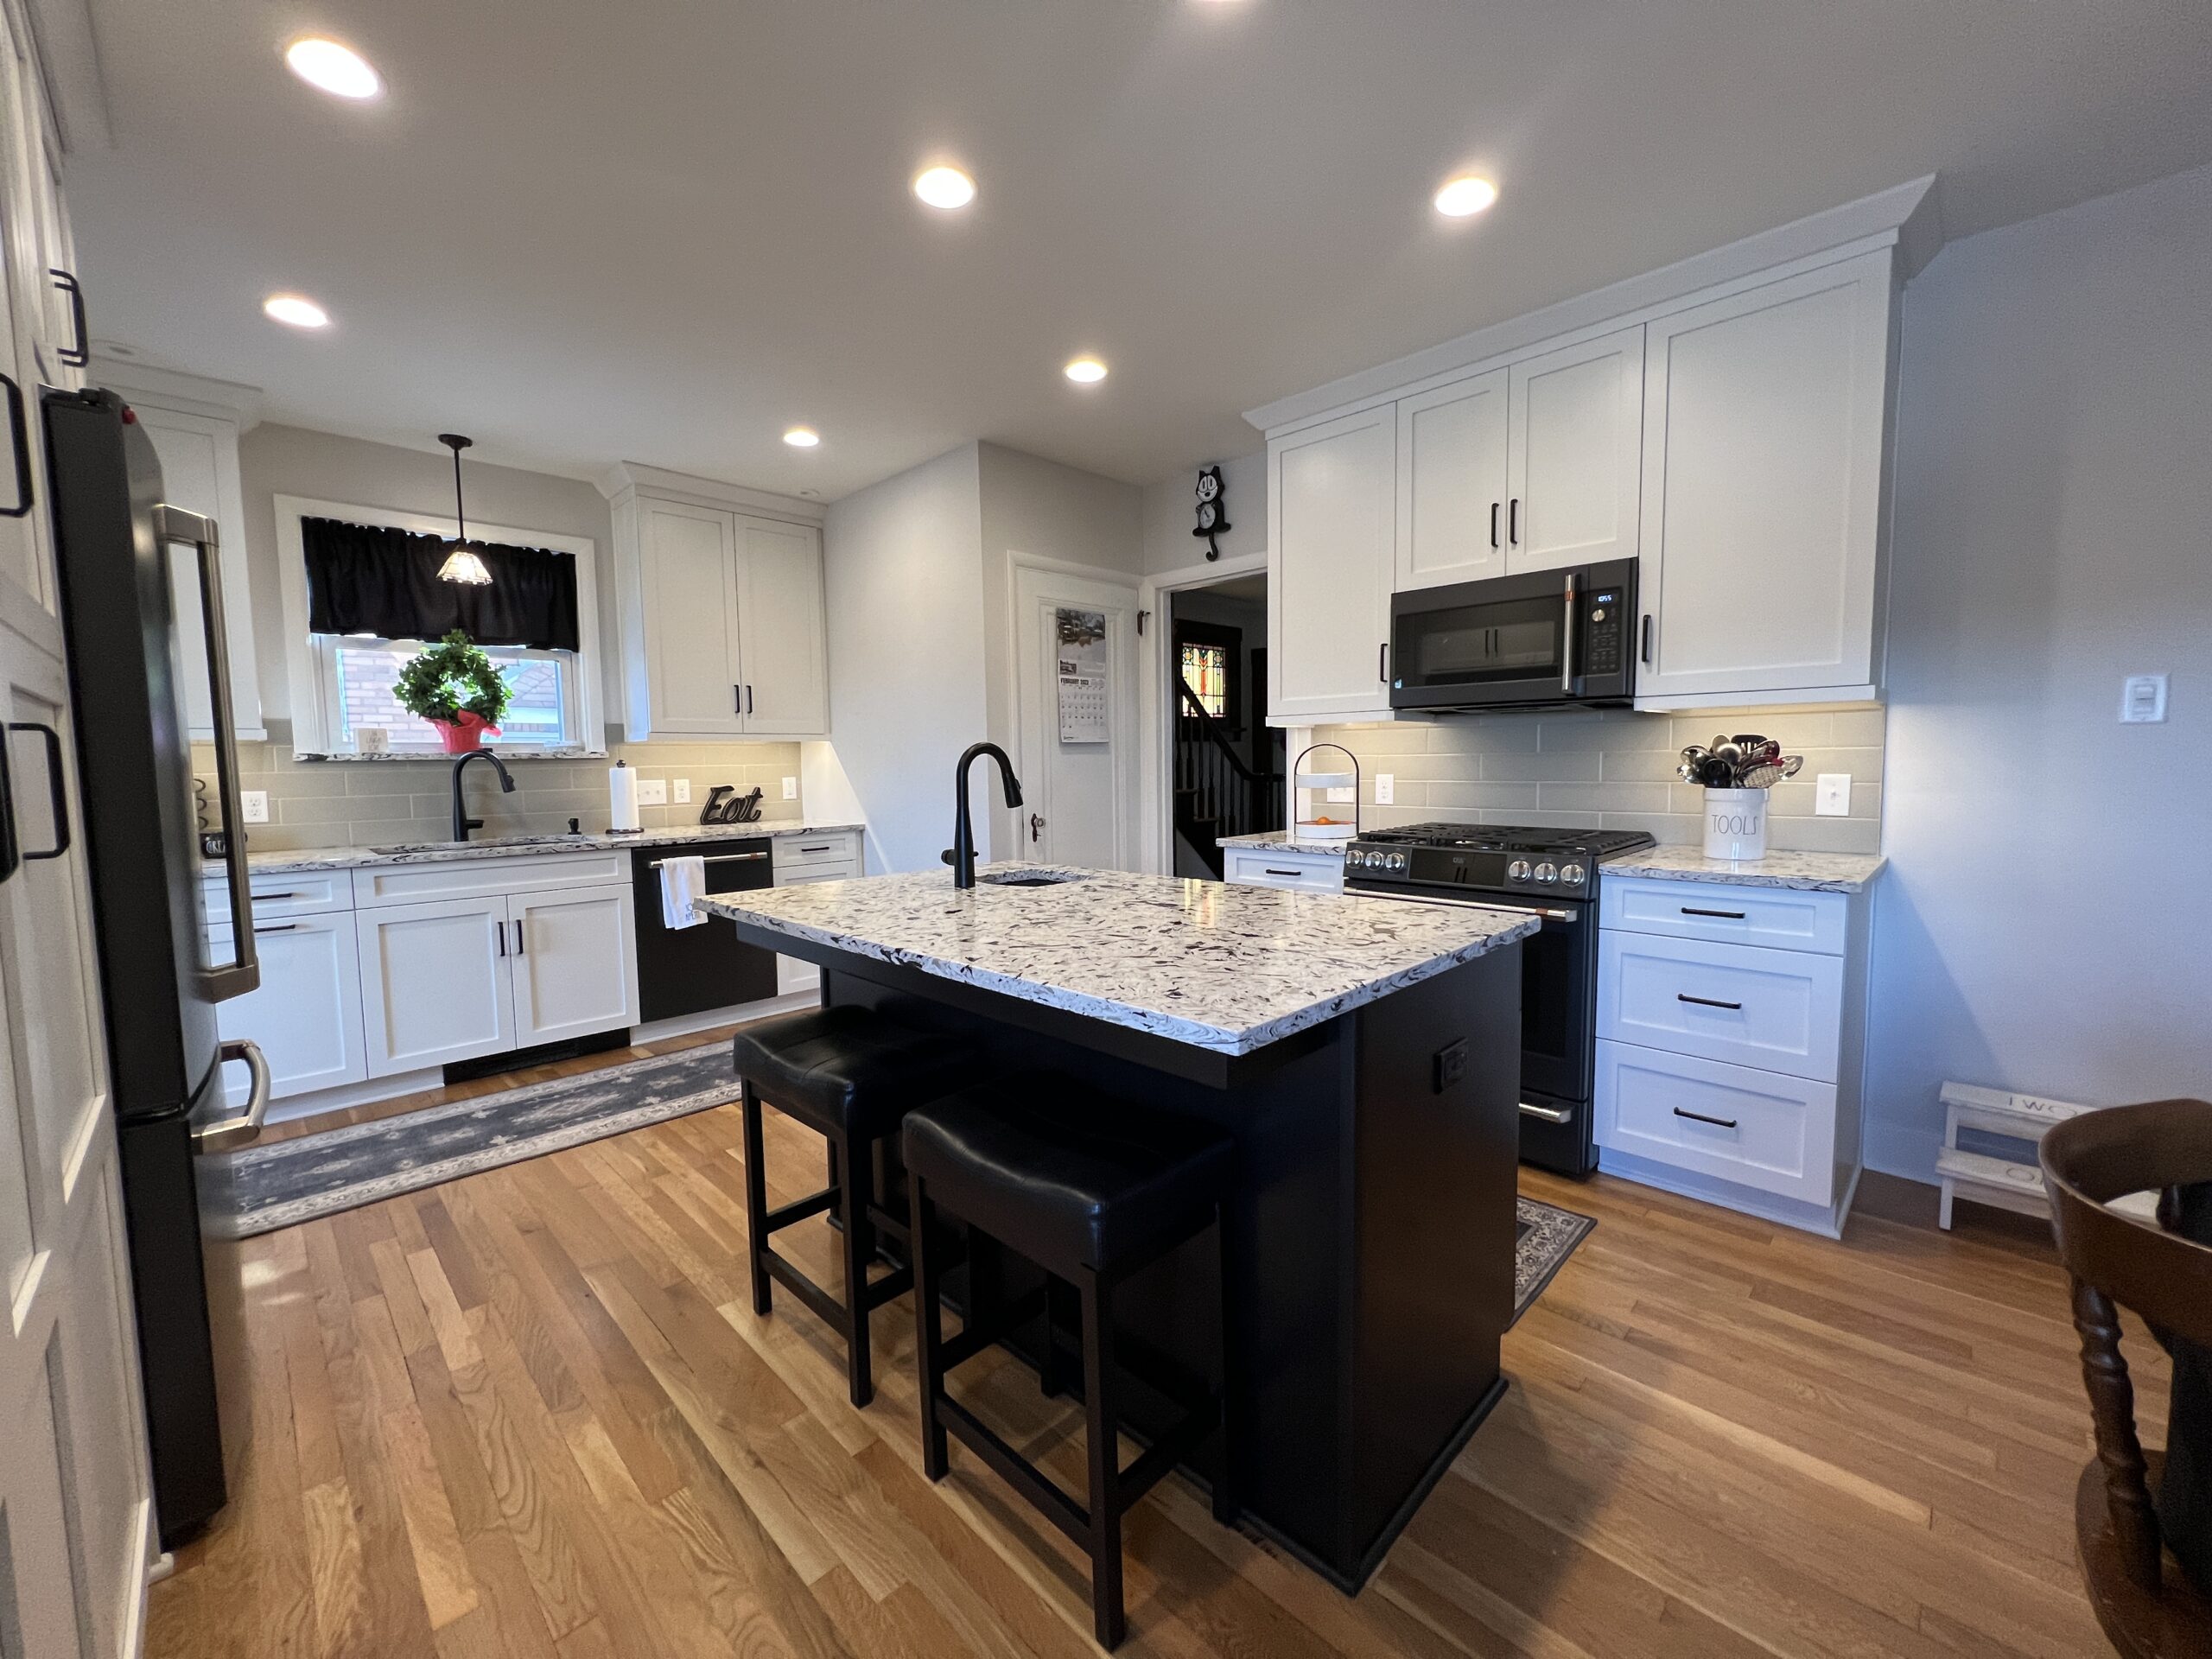 Contemporary black island kitchen remodeling, black and white marble countertop